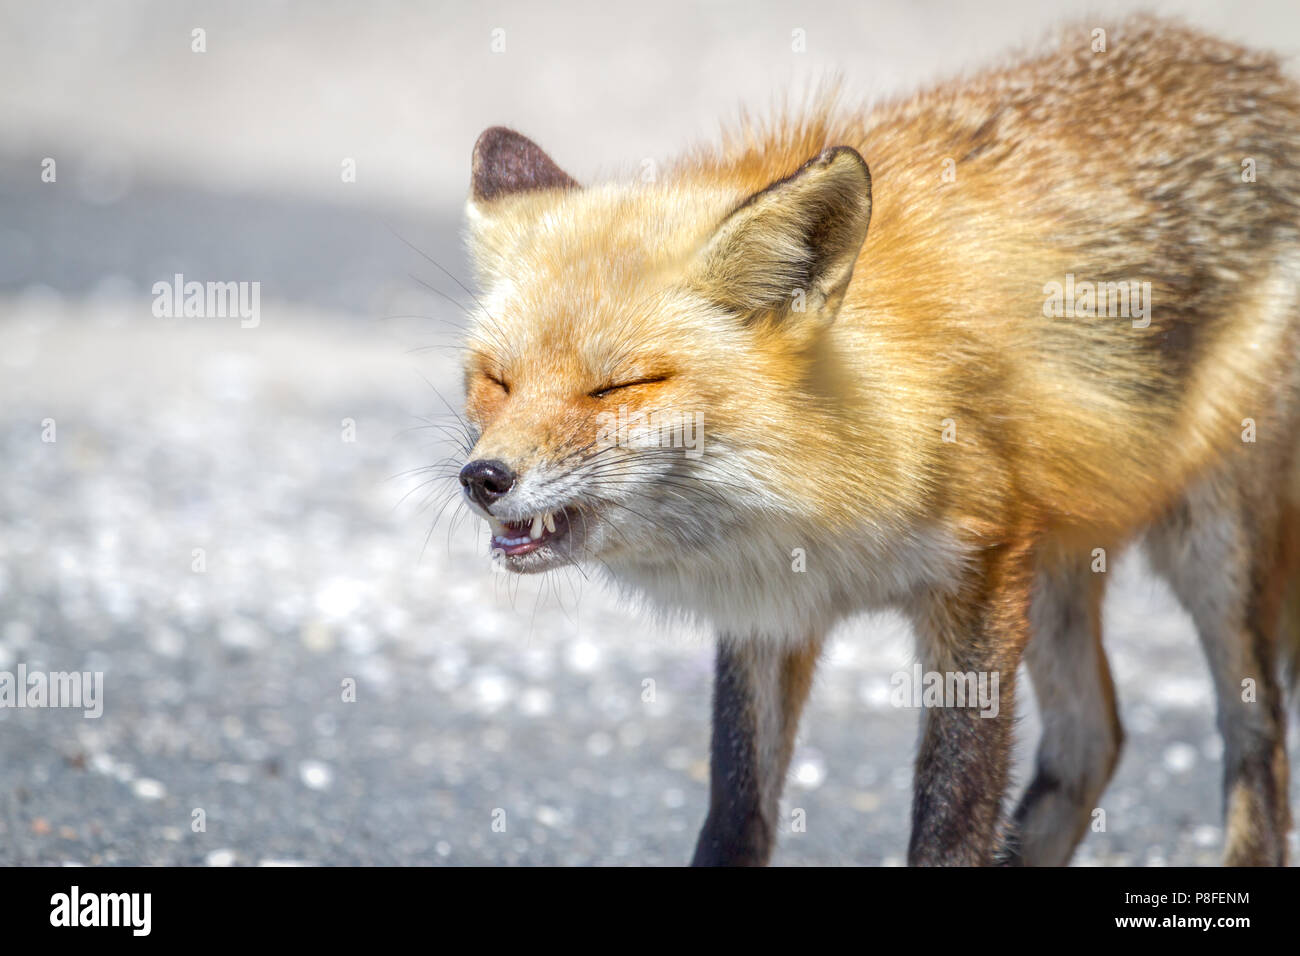 Red Fox woodland animal with Grimacing or laughing expression Stock Photo